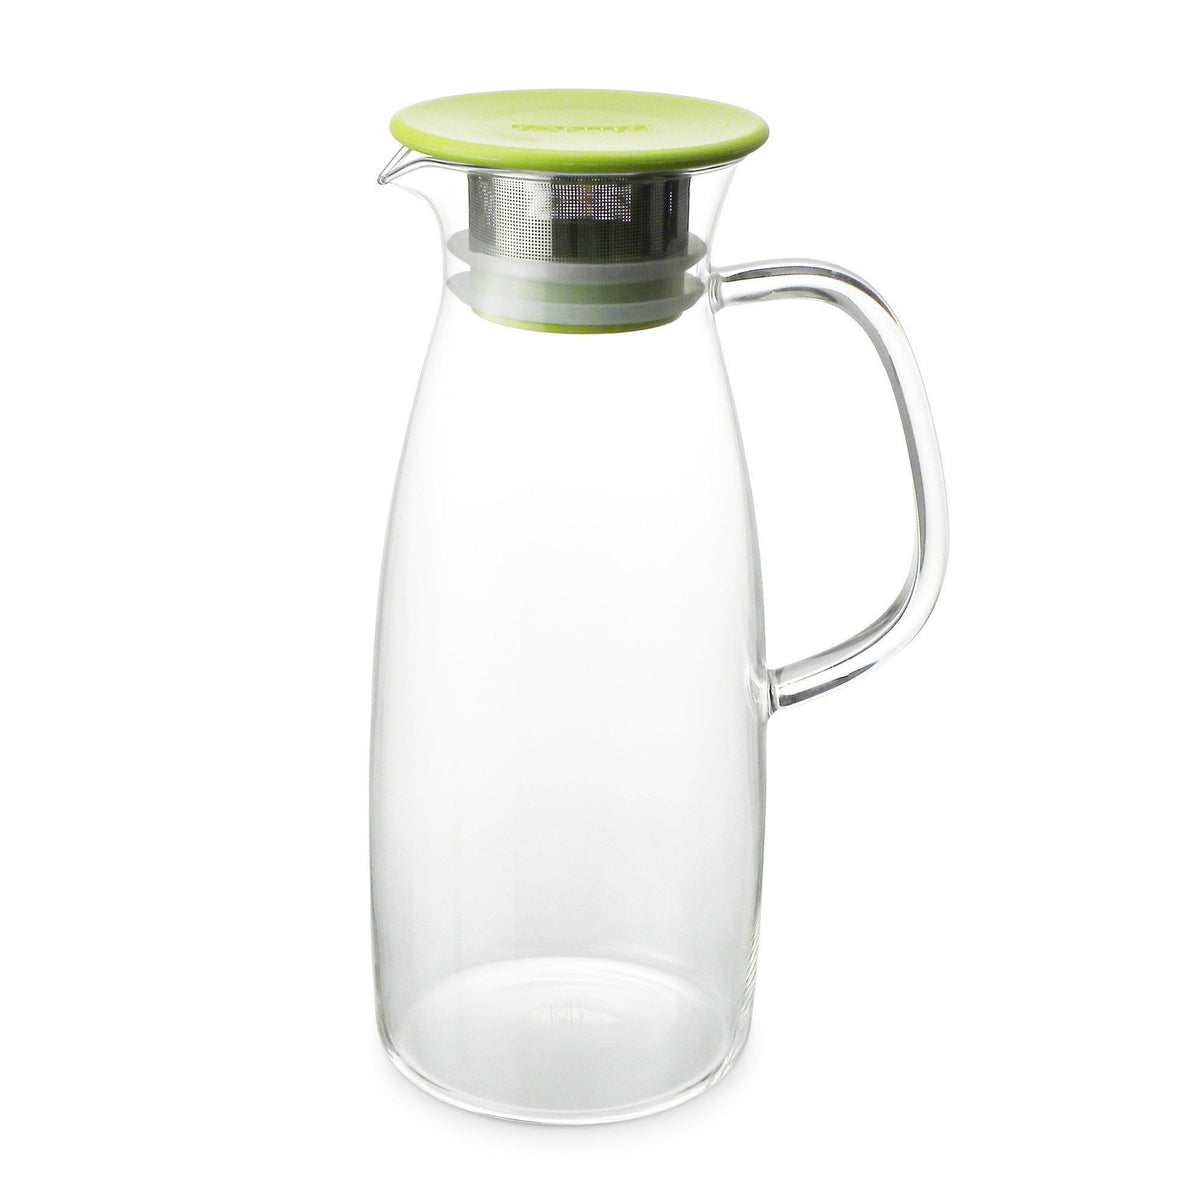 Large Glass Sharing Pitcher (12 oz)